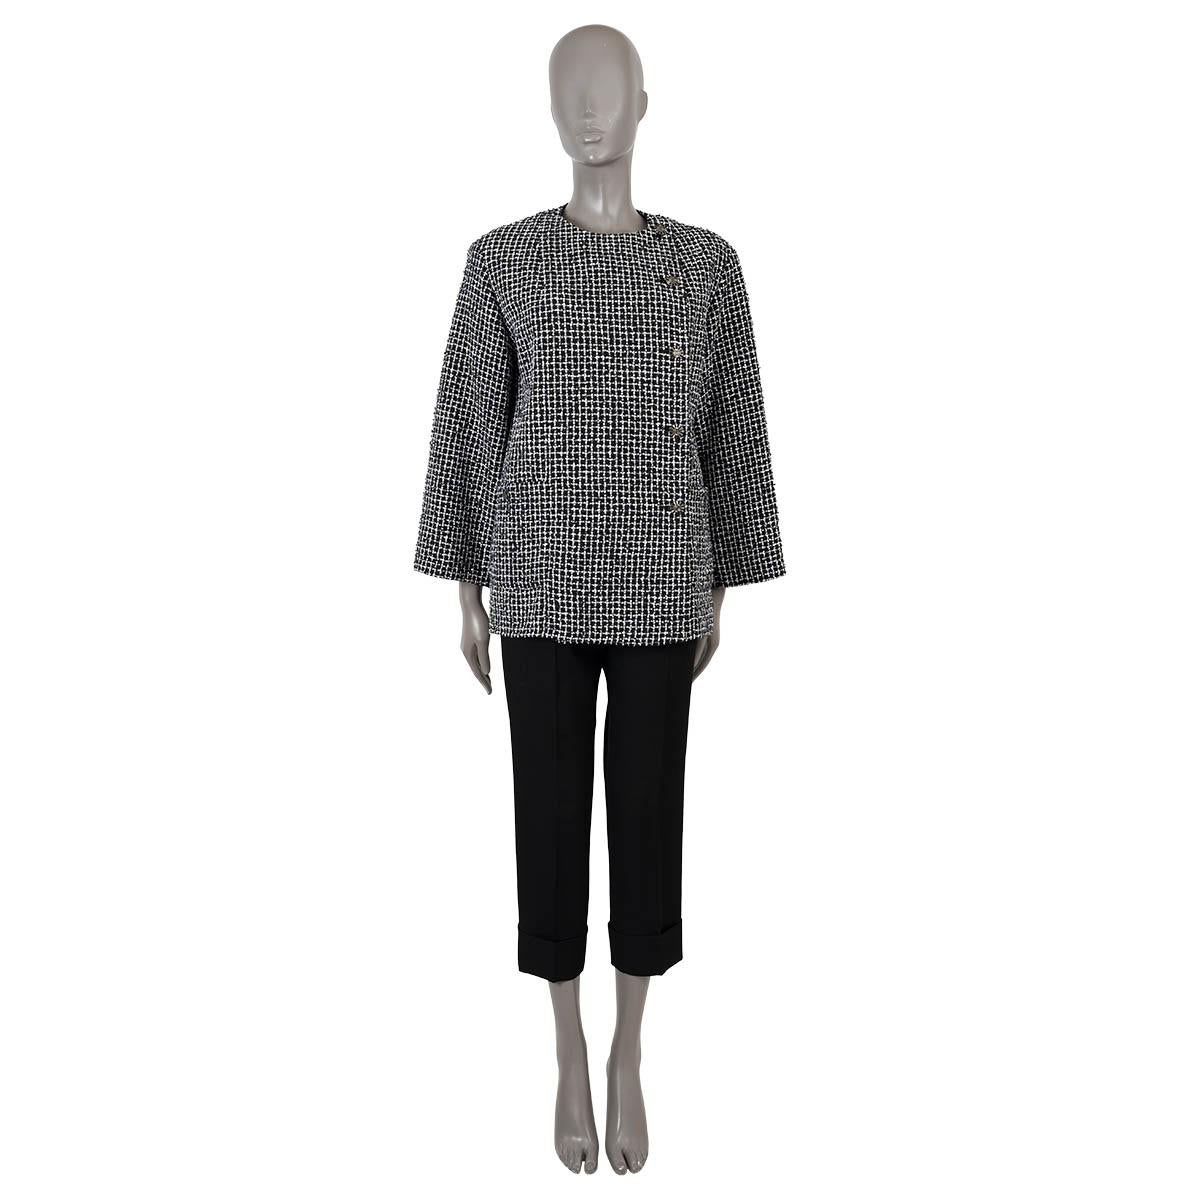 100% authentic Chanel collarless oversized tweed jacket in black and white polyamide (64%), polyester (27%) and wool (9%) with white sequins throughout. Features a boxy cut, two buttoned patch pockets at the waist and asymmetric button closure.